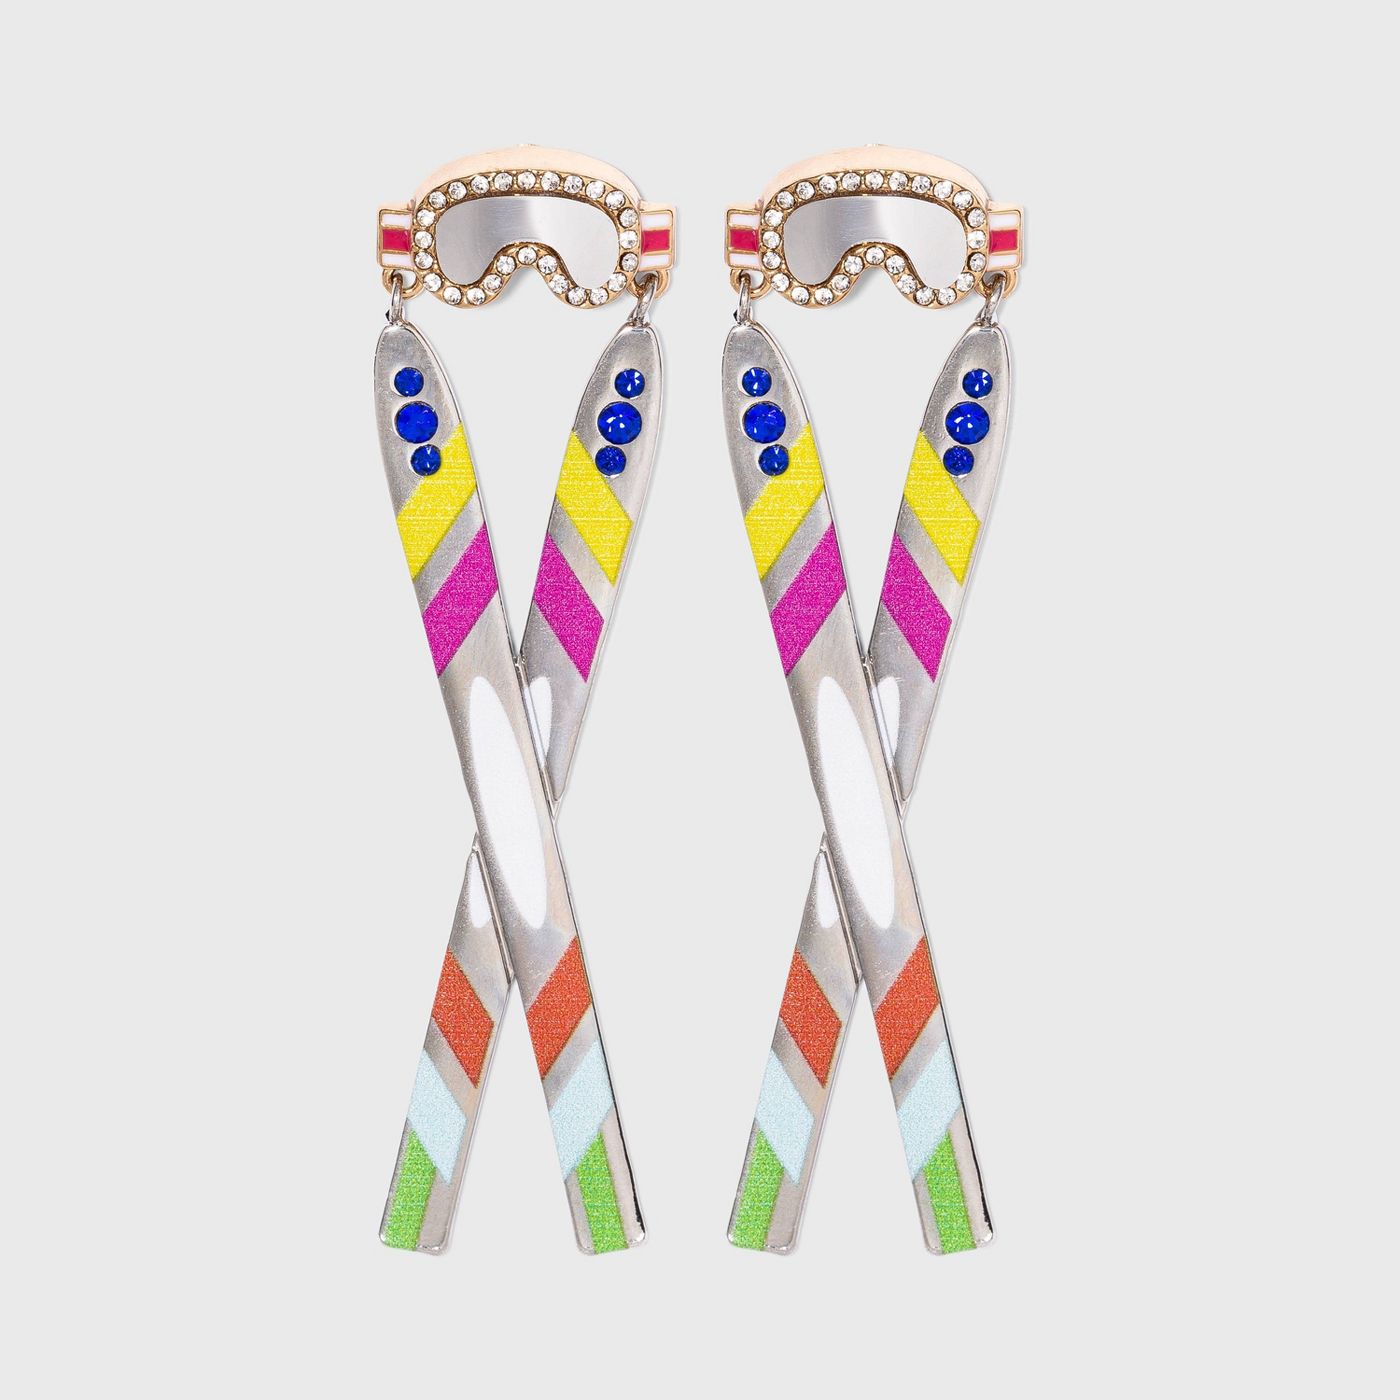 SUGARFIX by BaubleBar Snow Bunny Drop Earrings - image 1 of 6